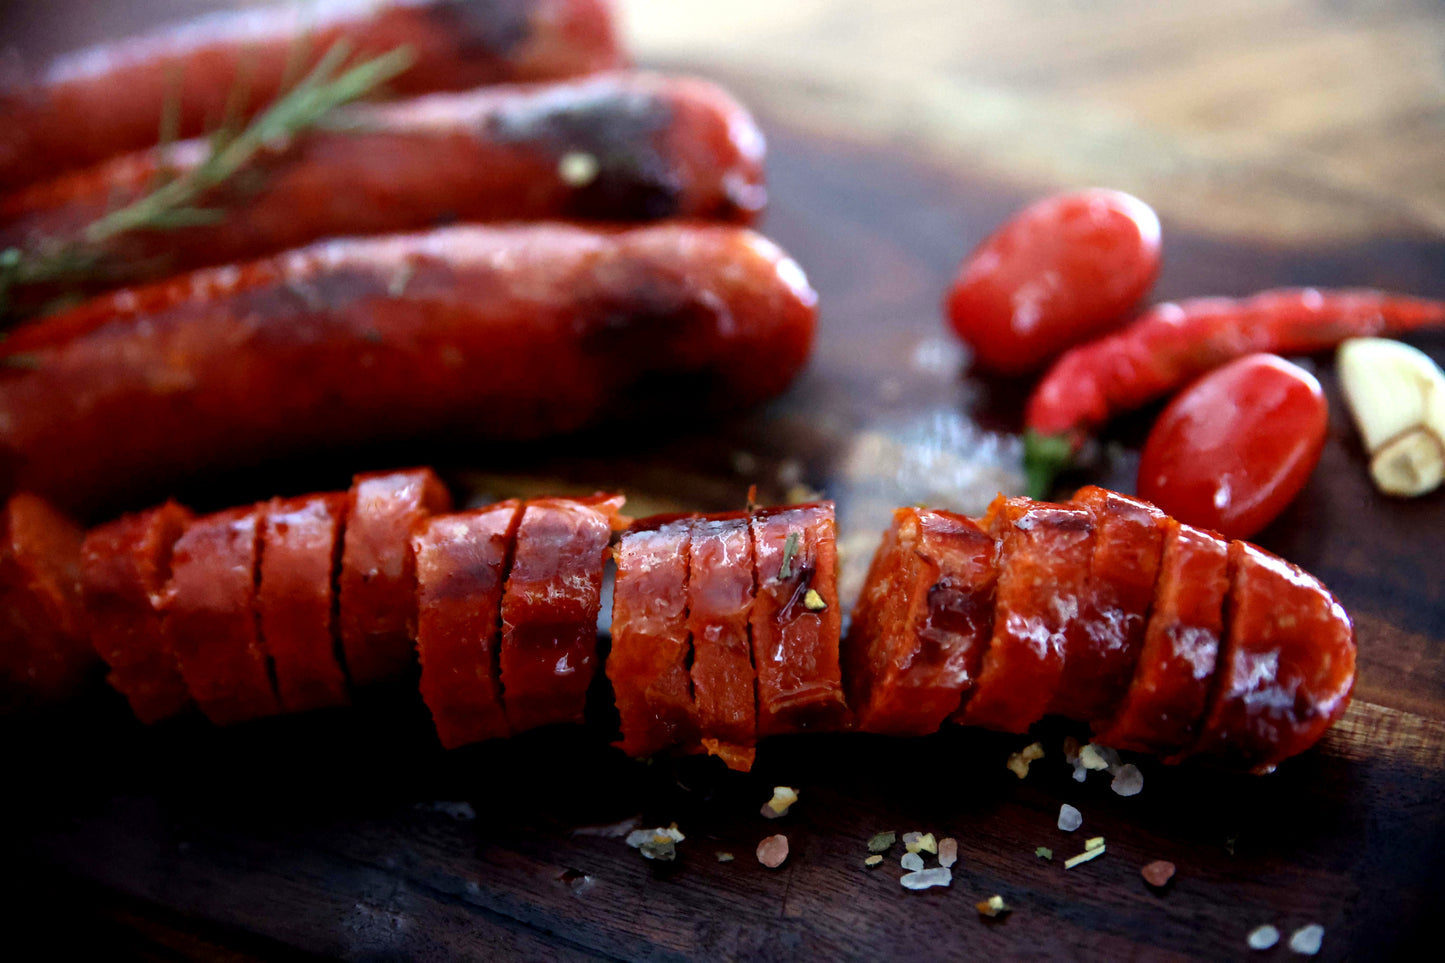 HOT Fresh Spanish Chorizo Random weight approx. 1kg packet 8 pieces regular price $16.00 AUD. You are guaranteed to receive at least 950g of product, equivalent price of $16.84 per kg.